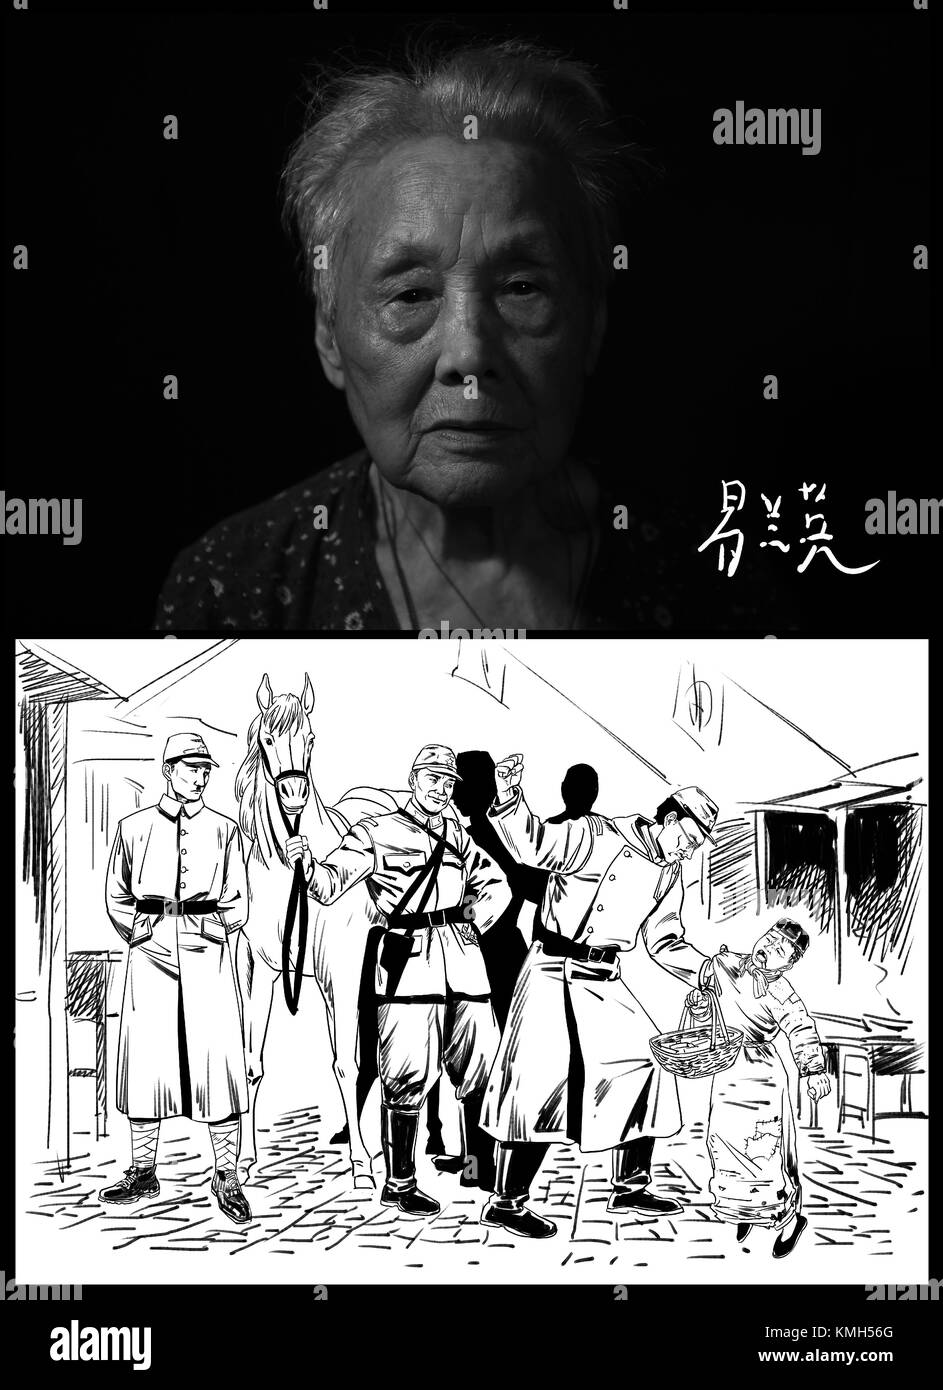 Nanjing, China. 10th Dec, 2017. (171210) -- NANJING, Dec. 10, 2017 (Xinhua) -- The combo picture shows the portrait, signature of Yi Lanying and illustrated story reviving her tragedy based on facts.  Born on May 4, 1926, Yi is a survivor of Nanjing Massacre, a heinous crime committed by the Japanese militarists during World War II in 1937, in Nanjing, then capital of China. After Nanjing being occupied by the Japanese invaders, Yi and her elder sister moved to the 'Nanjing Safety Zone' set up by an international committee headed by John Rabe. Even inside the safety zone, the sisters had to ru Stock Photo